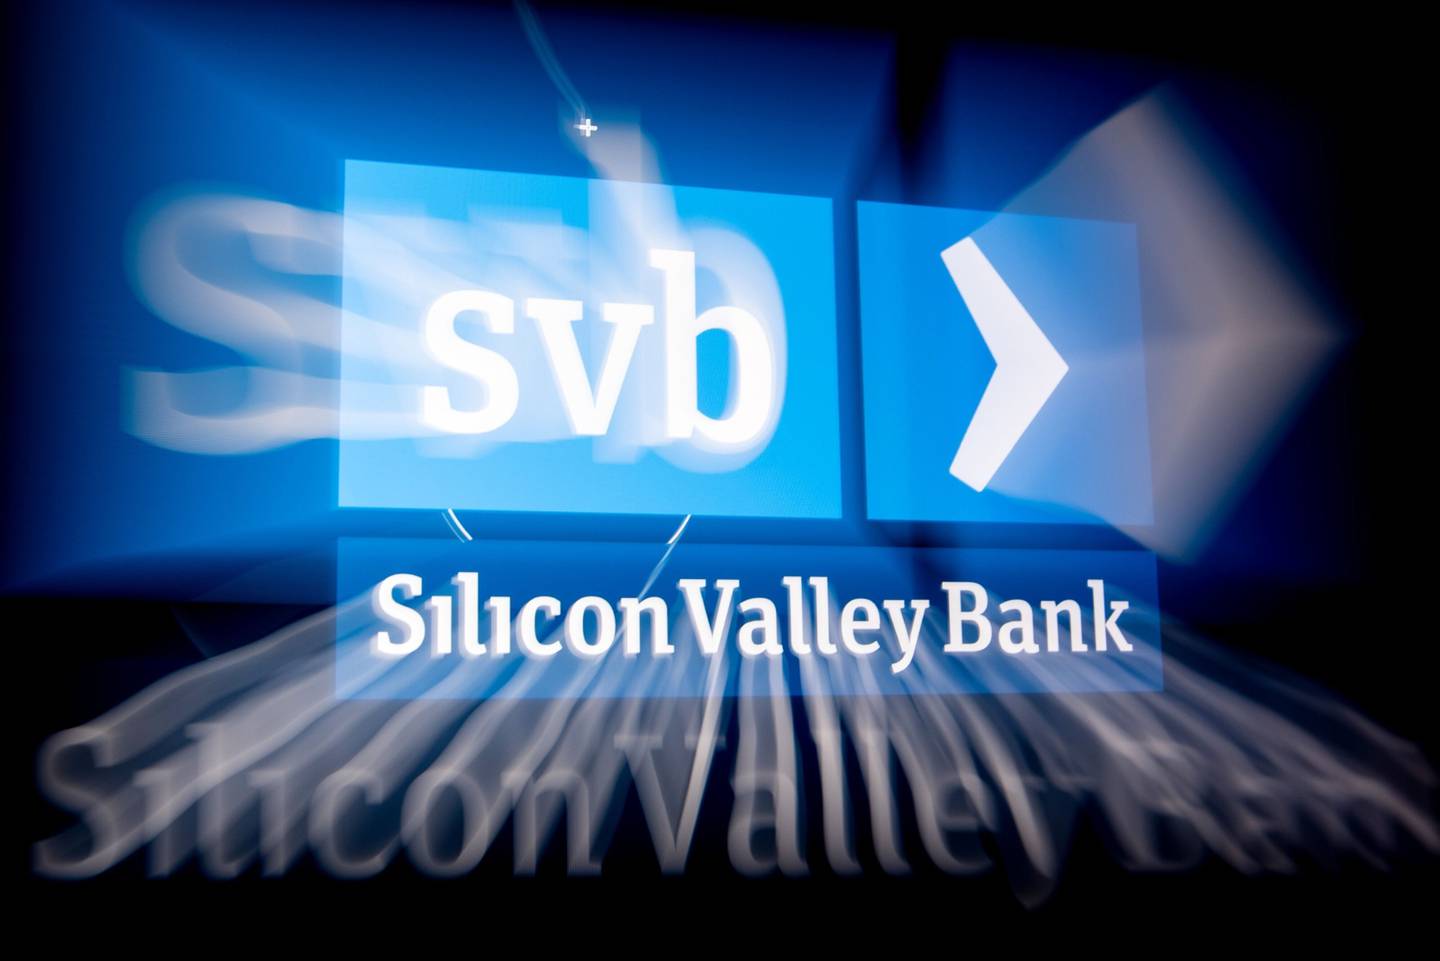 Brazilian founders of startups receiving foreign venture capital investment have traditionally opened an account with SVB